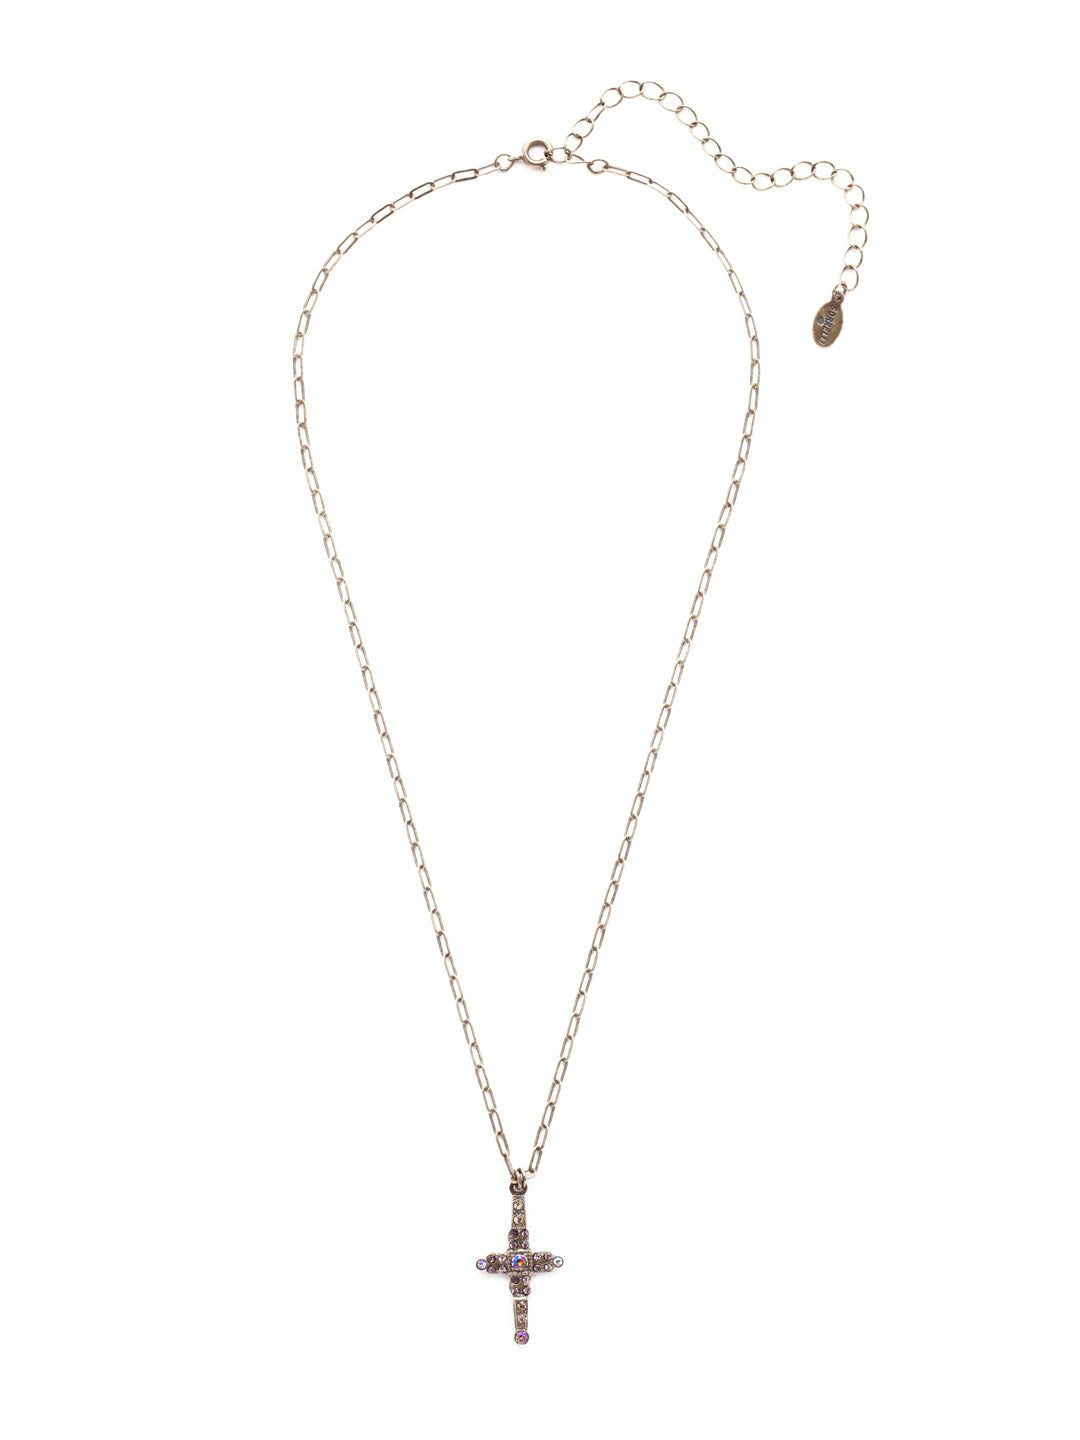 Bridget Cross Pendant Necklace - NEX4AGMIR - <p>Dainty and delicate, The Bridget Cross Pendant Necklace is the perfect wardrobe staple. A small cross pendant covered in crystals hangs prominently on an adjustable chain. From Sorrelli's Mirage collection in our Antique Gold-tone finish.</p>